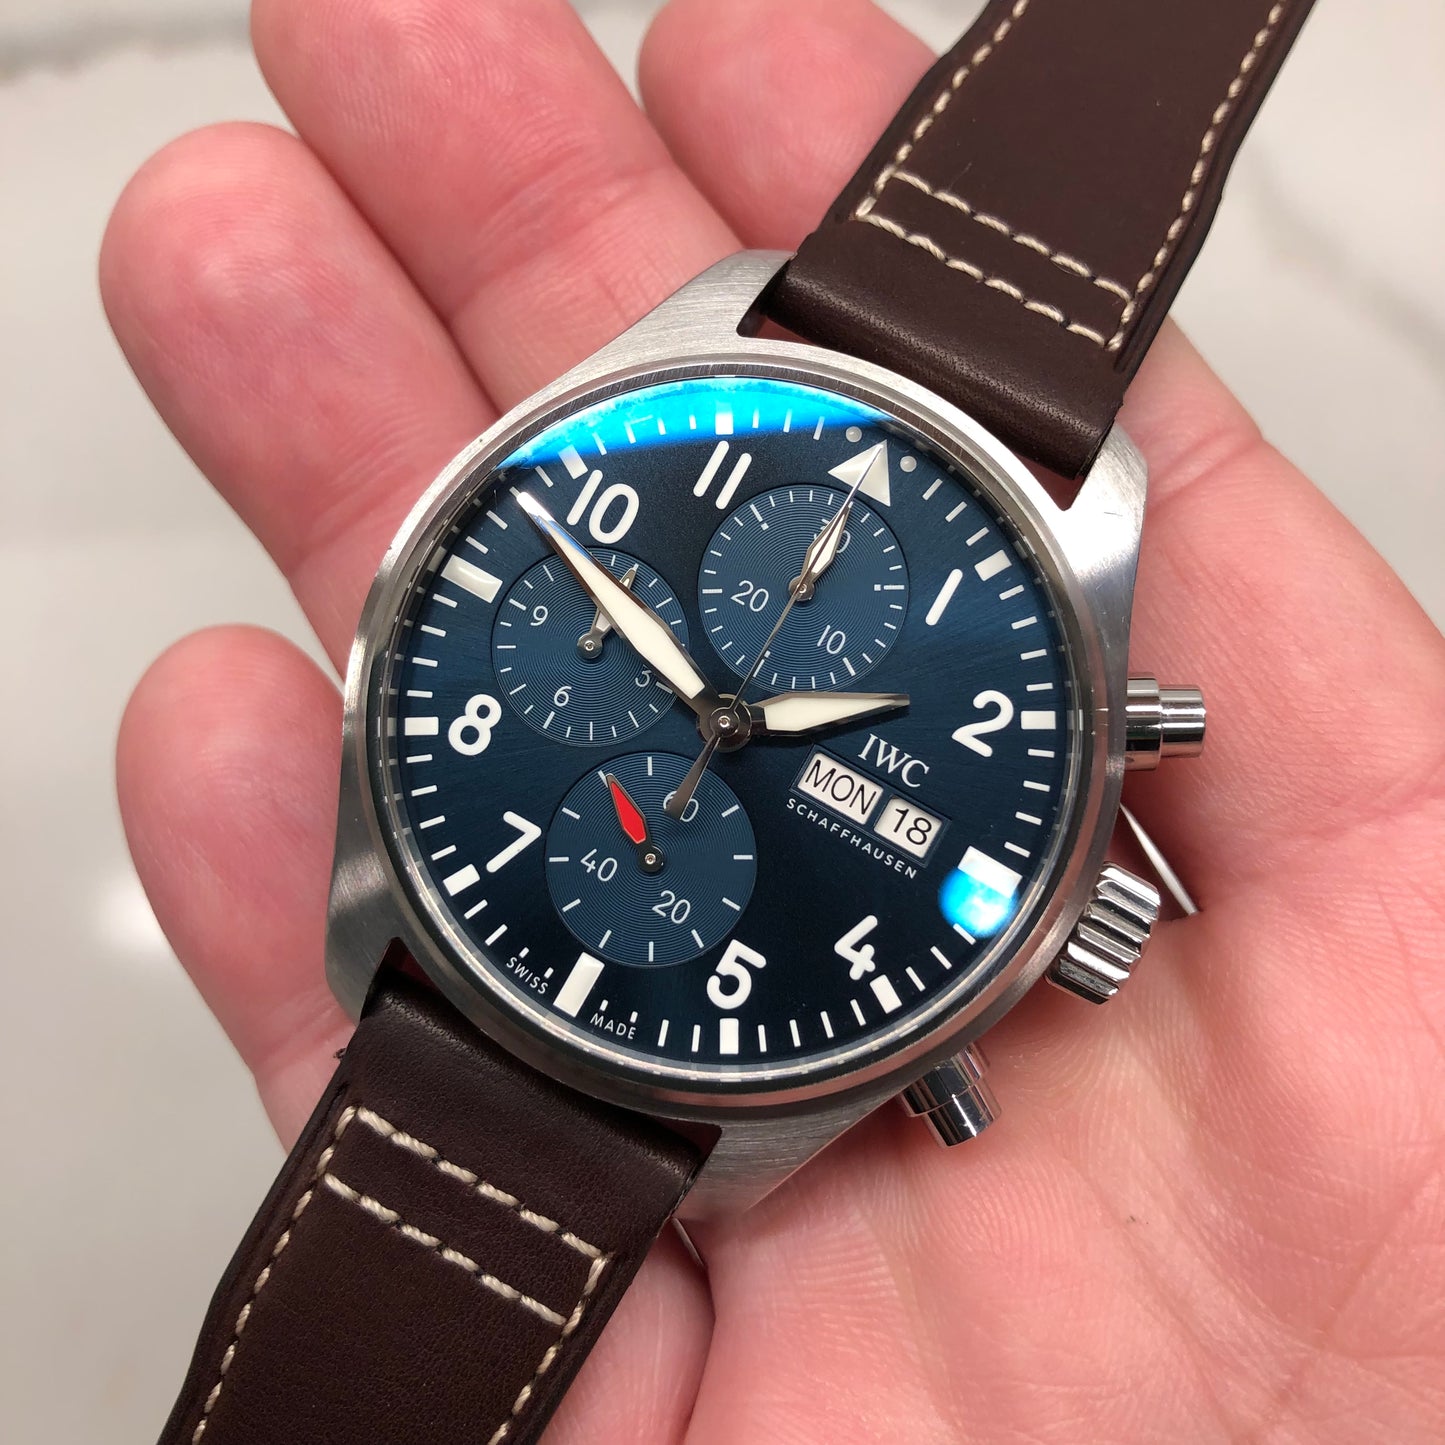 2021 IWC Pilot IW388101 Automatic Blue Dial Men's Wristwatch with Box and Papers - HASHTAGWATCHCO